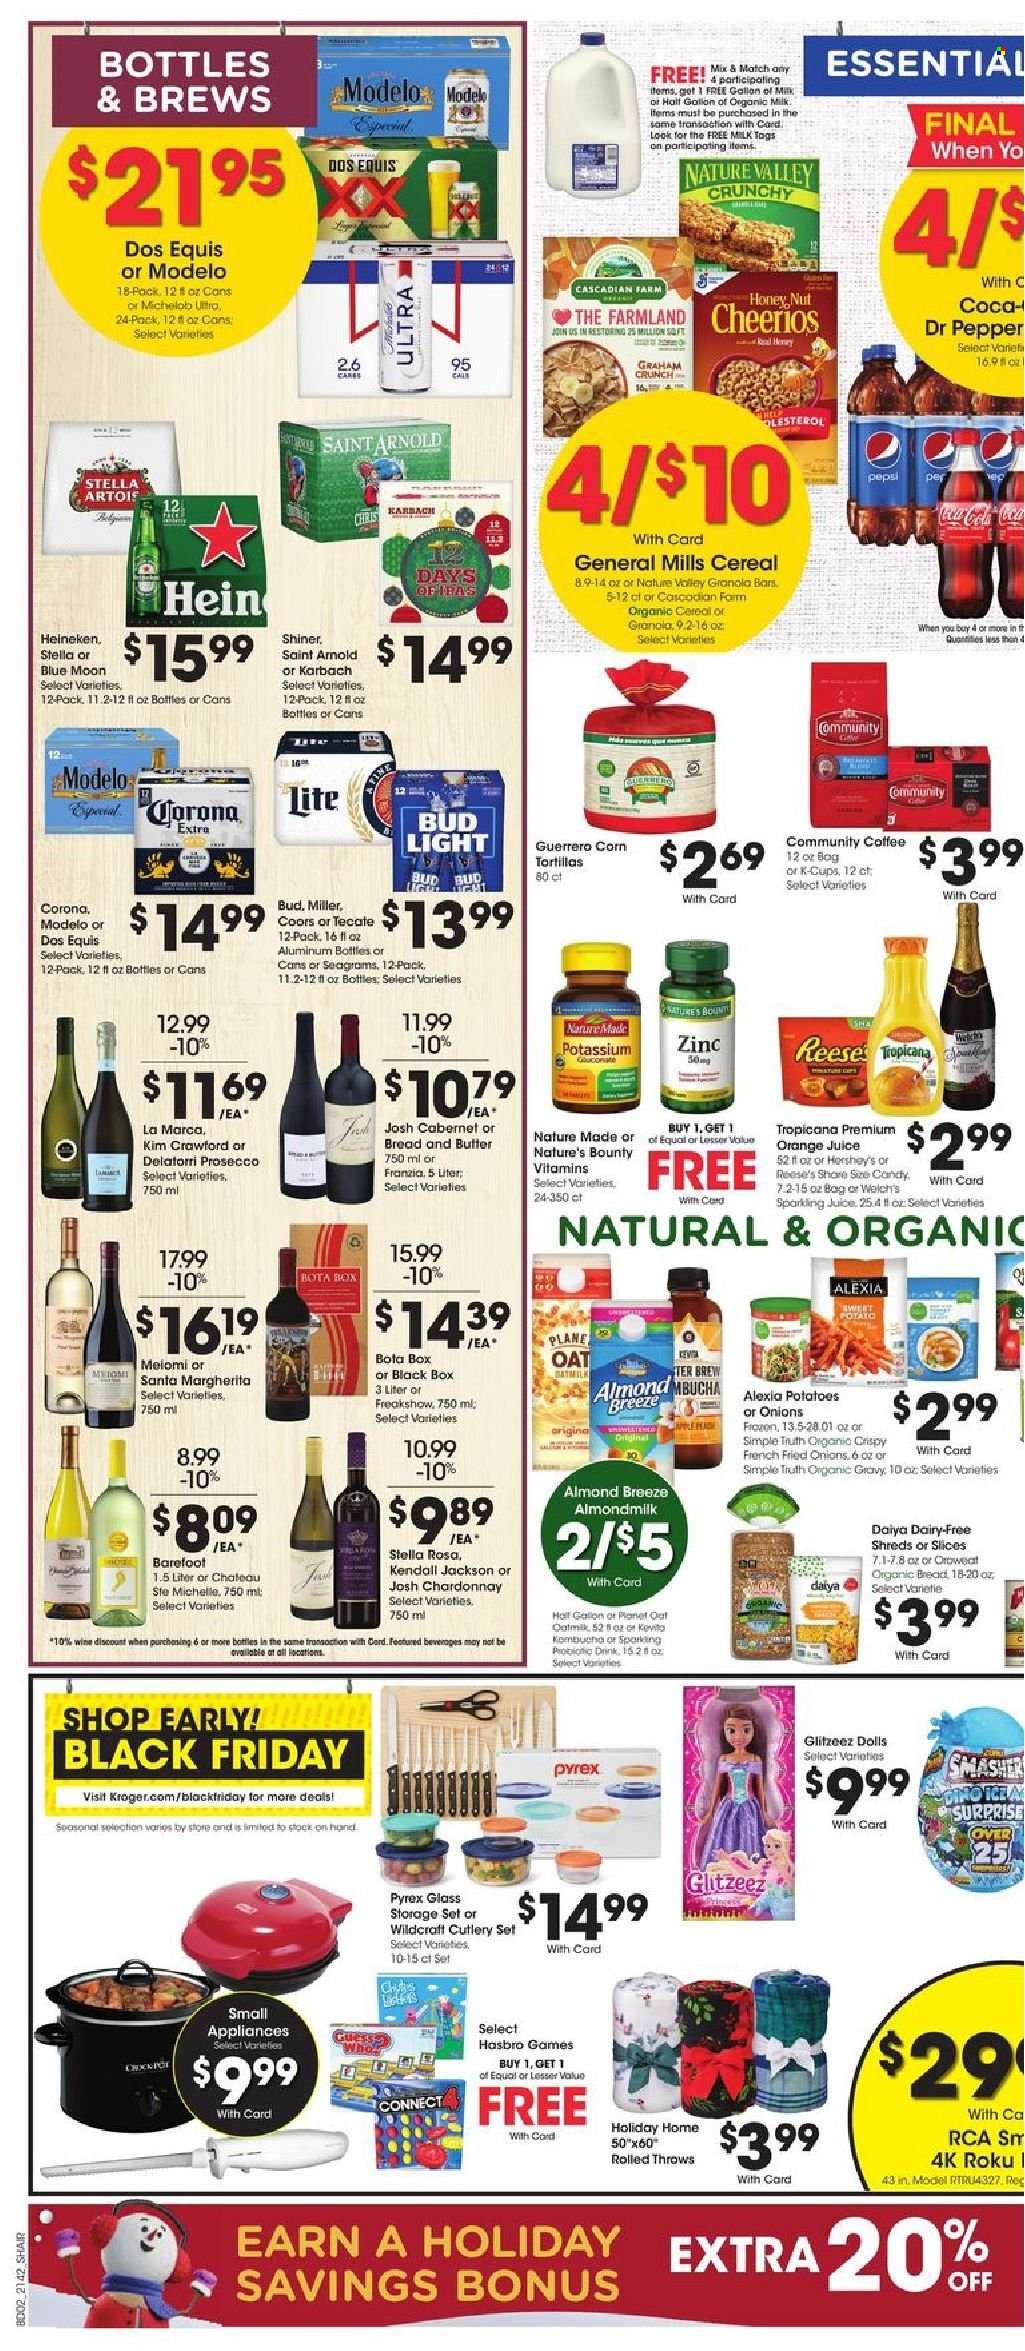 thumbnail - Kroger Flyer - 11/17/2021 - 11/25/2021 - Sales products - corn tortillas, tortillas, potatoes, onion, Welch's, almond milk, milk, Almond Breeze, butter, Reese's, Santa, oats, cereals, granola, Cheerios, Nature Valley, Pepsi, orange juice, juice, Dr. Pepper, kombucha, coffee, coffee capsules, K-Cups, Cabernet Sauvignon, white wine, prosecco, Chardonnay, wine, beer, Bud Light, Corona Extra, Heineken, Miller, Modelo, cutlery set, Pyrex, storage container set, RCA, doll, Hasbro, Nature Made, Nature's Bounty, zinc, Stella Artois, Coors, Dos Equis, Blue Moon, Michelob. Page 5.